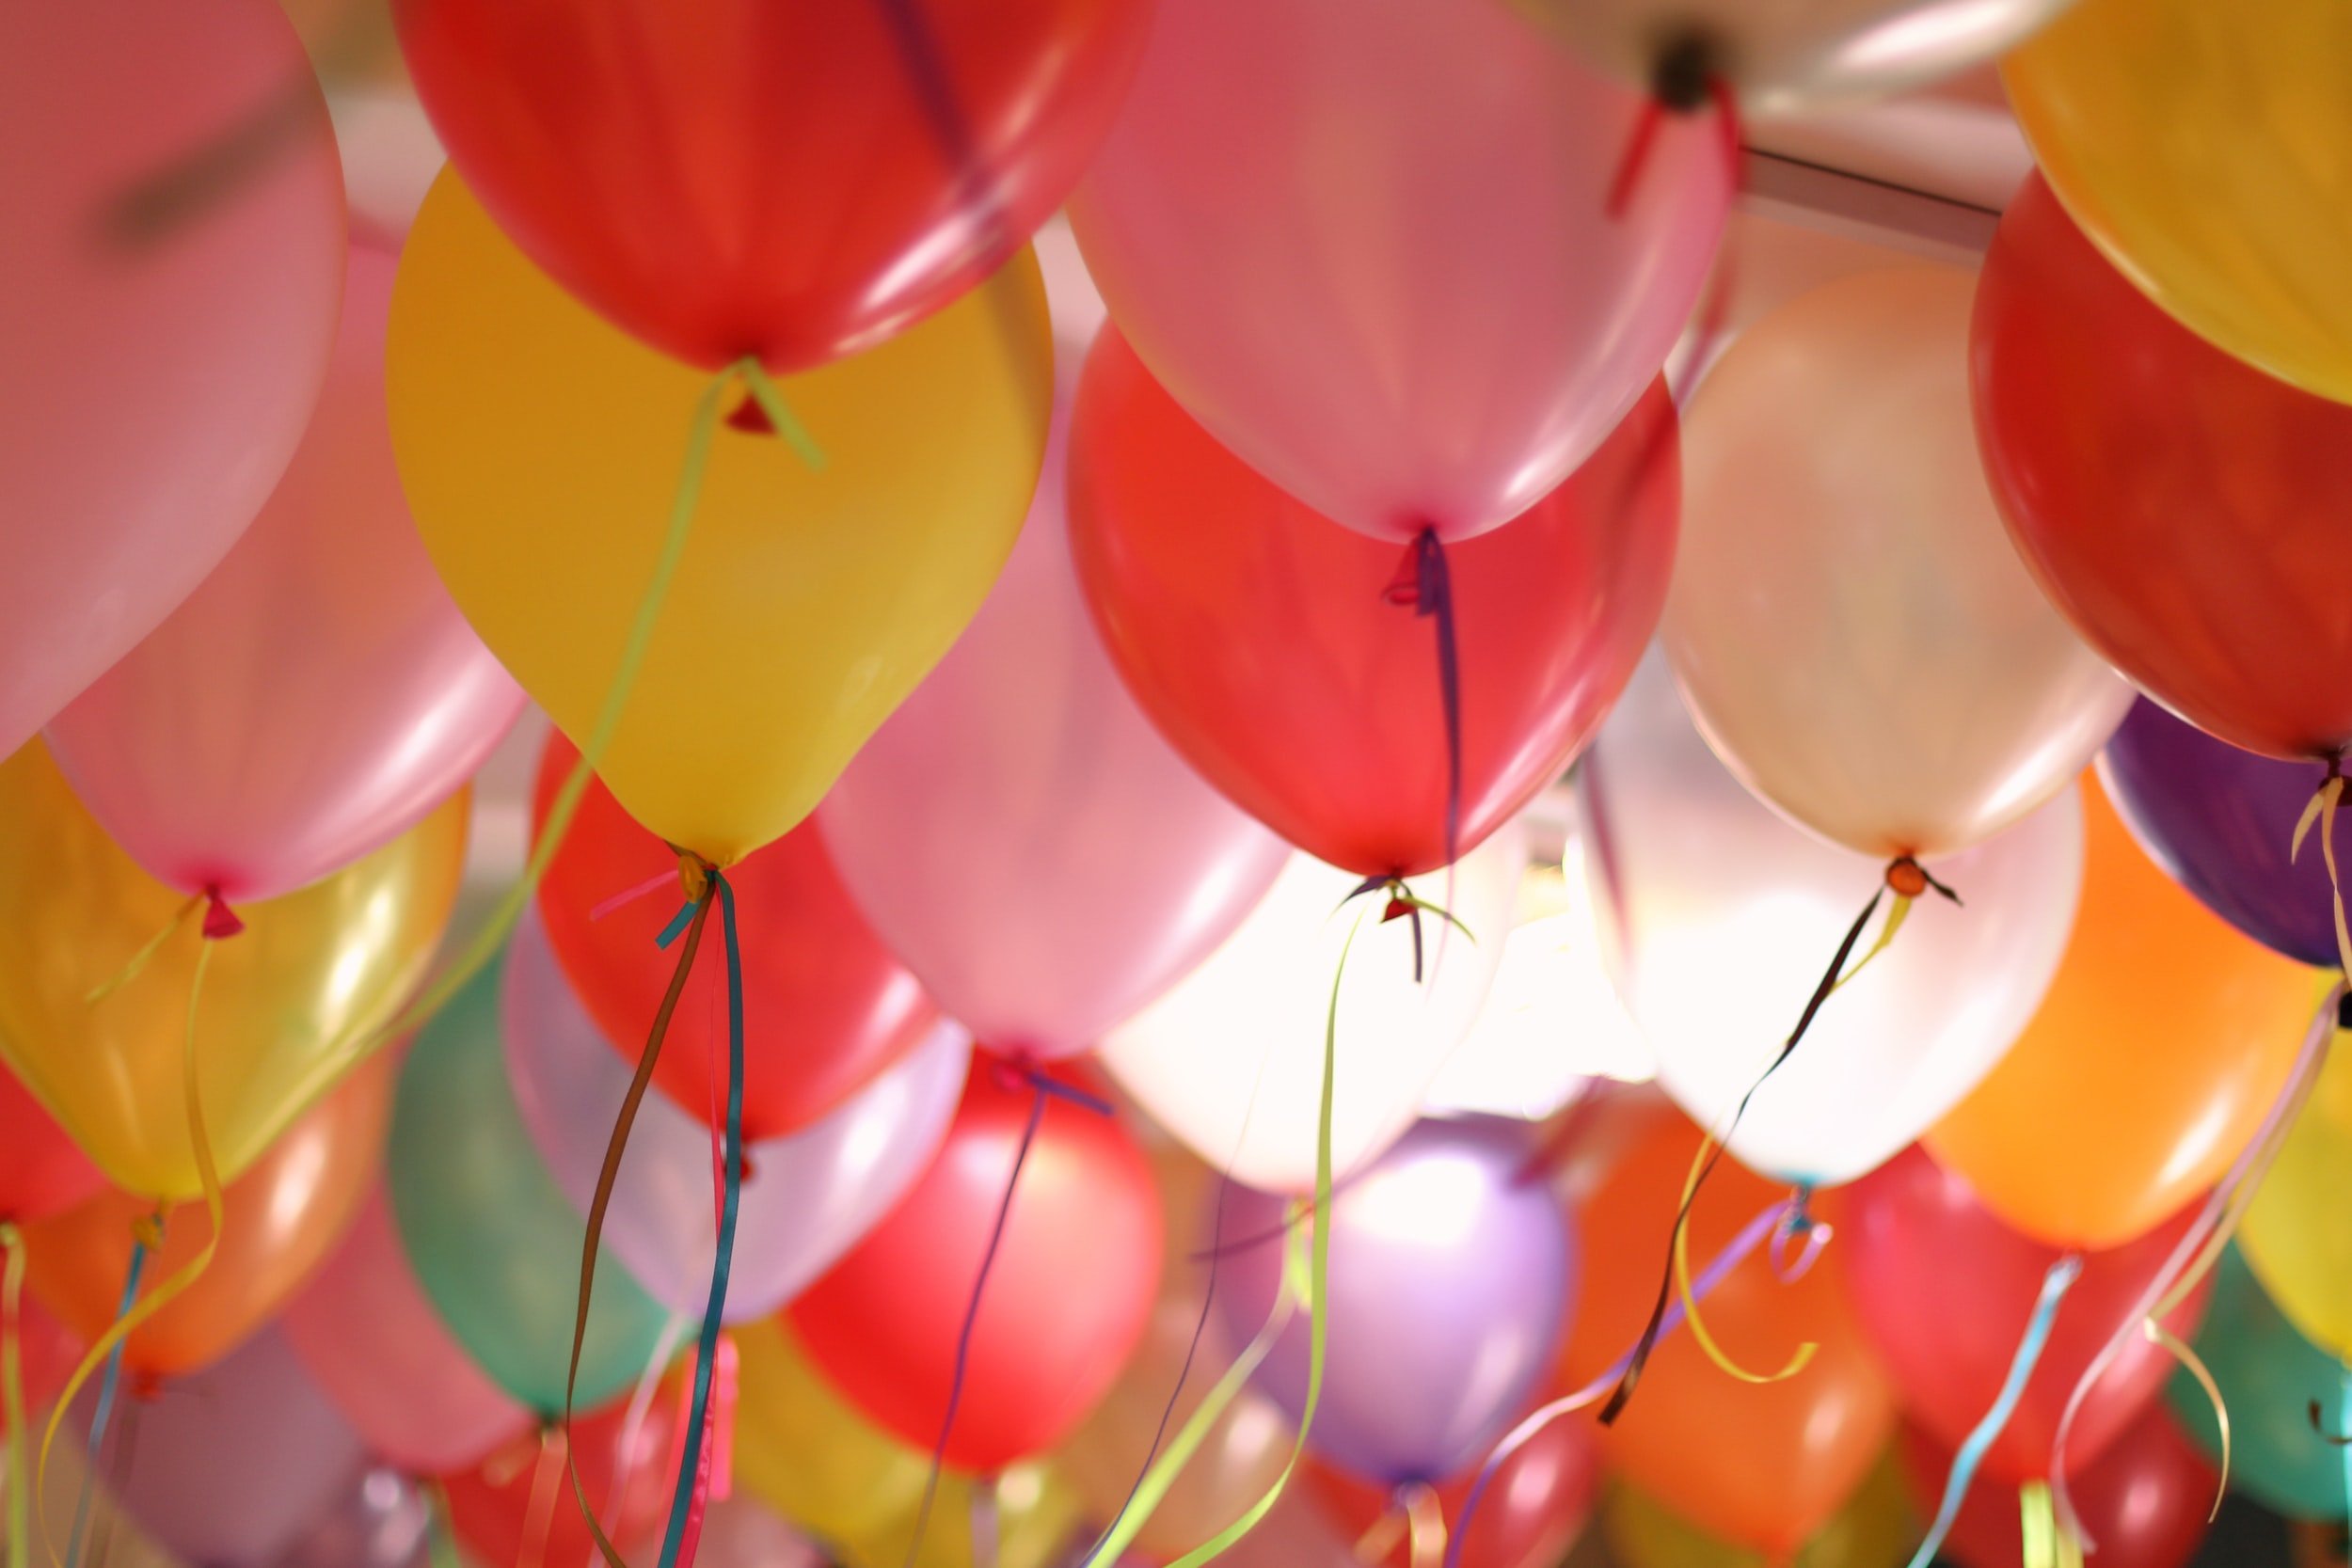 Yellow, read, and pink balloons hitting the ceiling